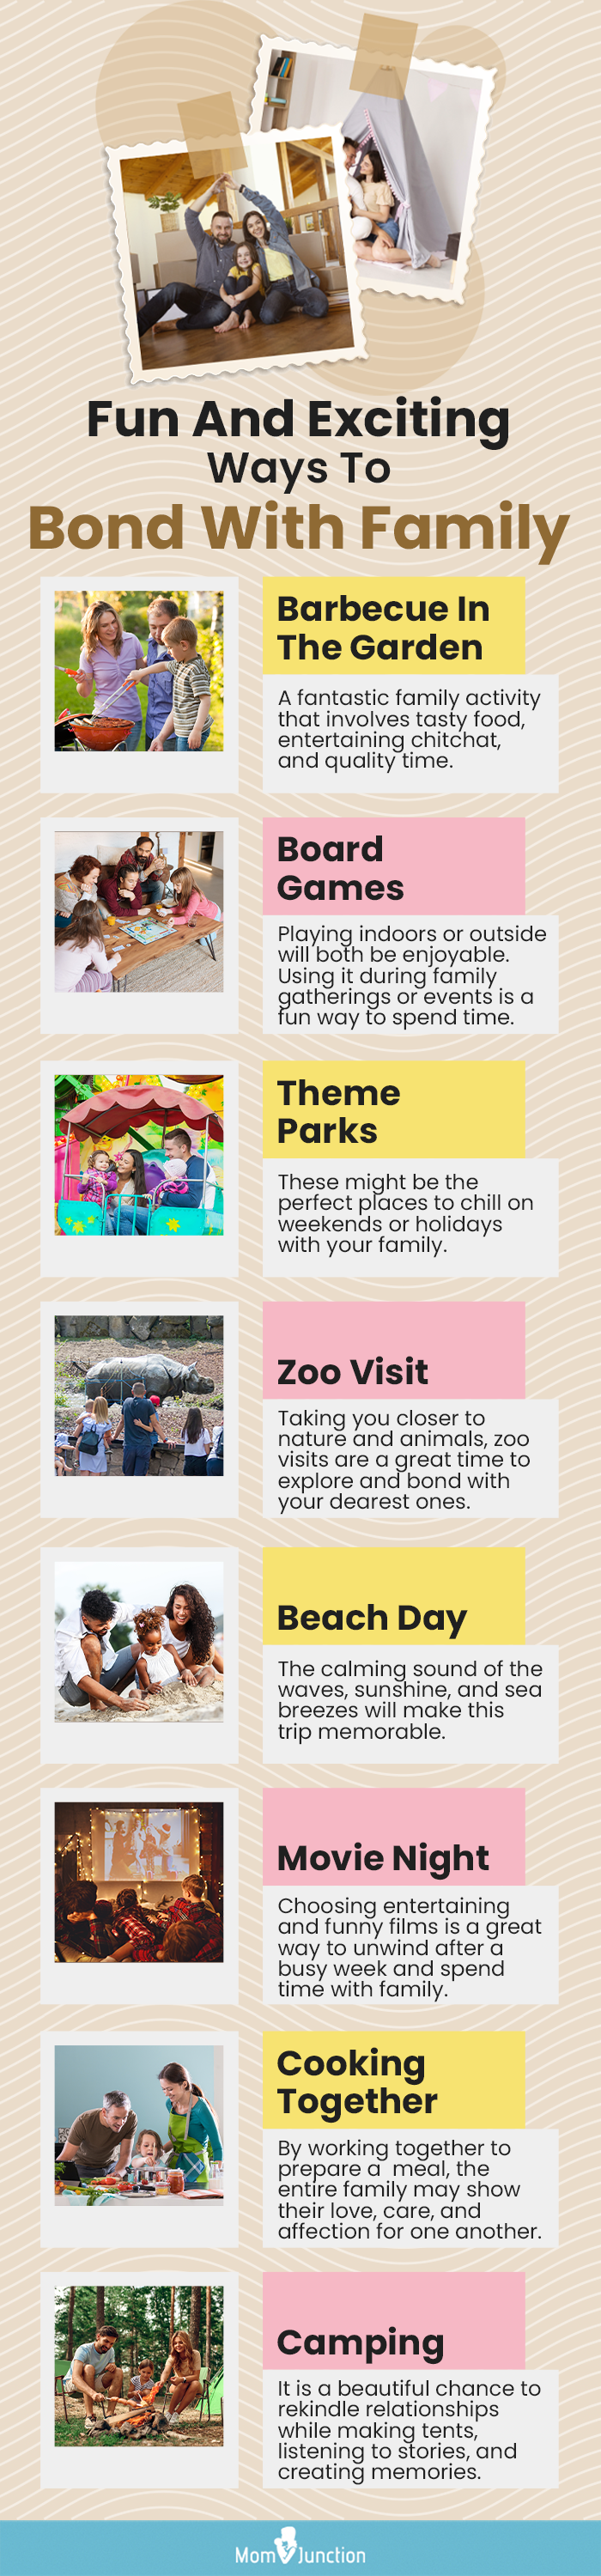 fun and exciting ways to bond with family (infographic)